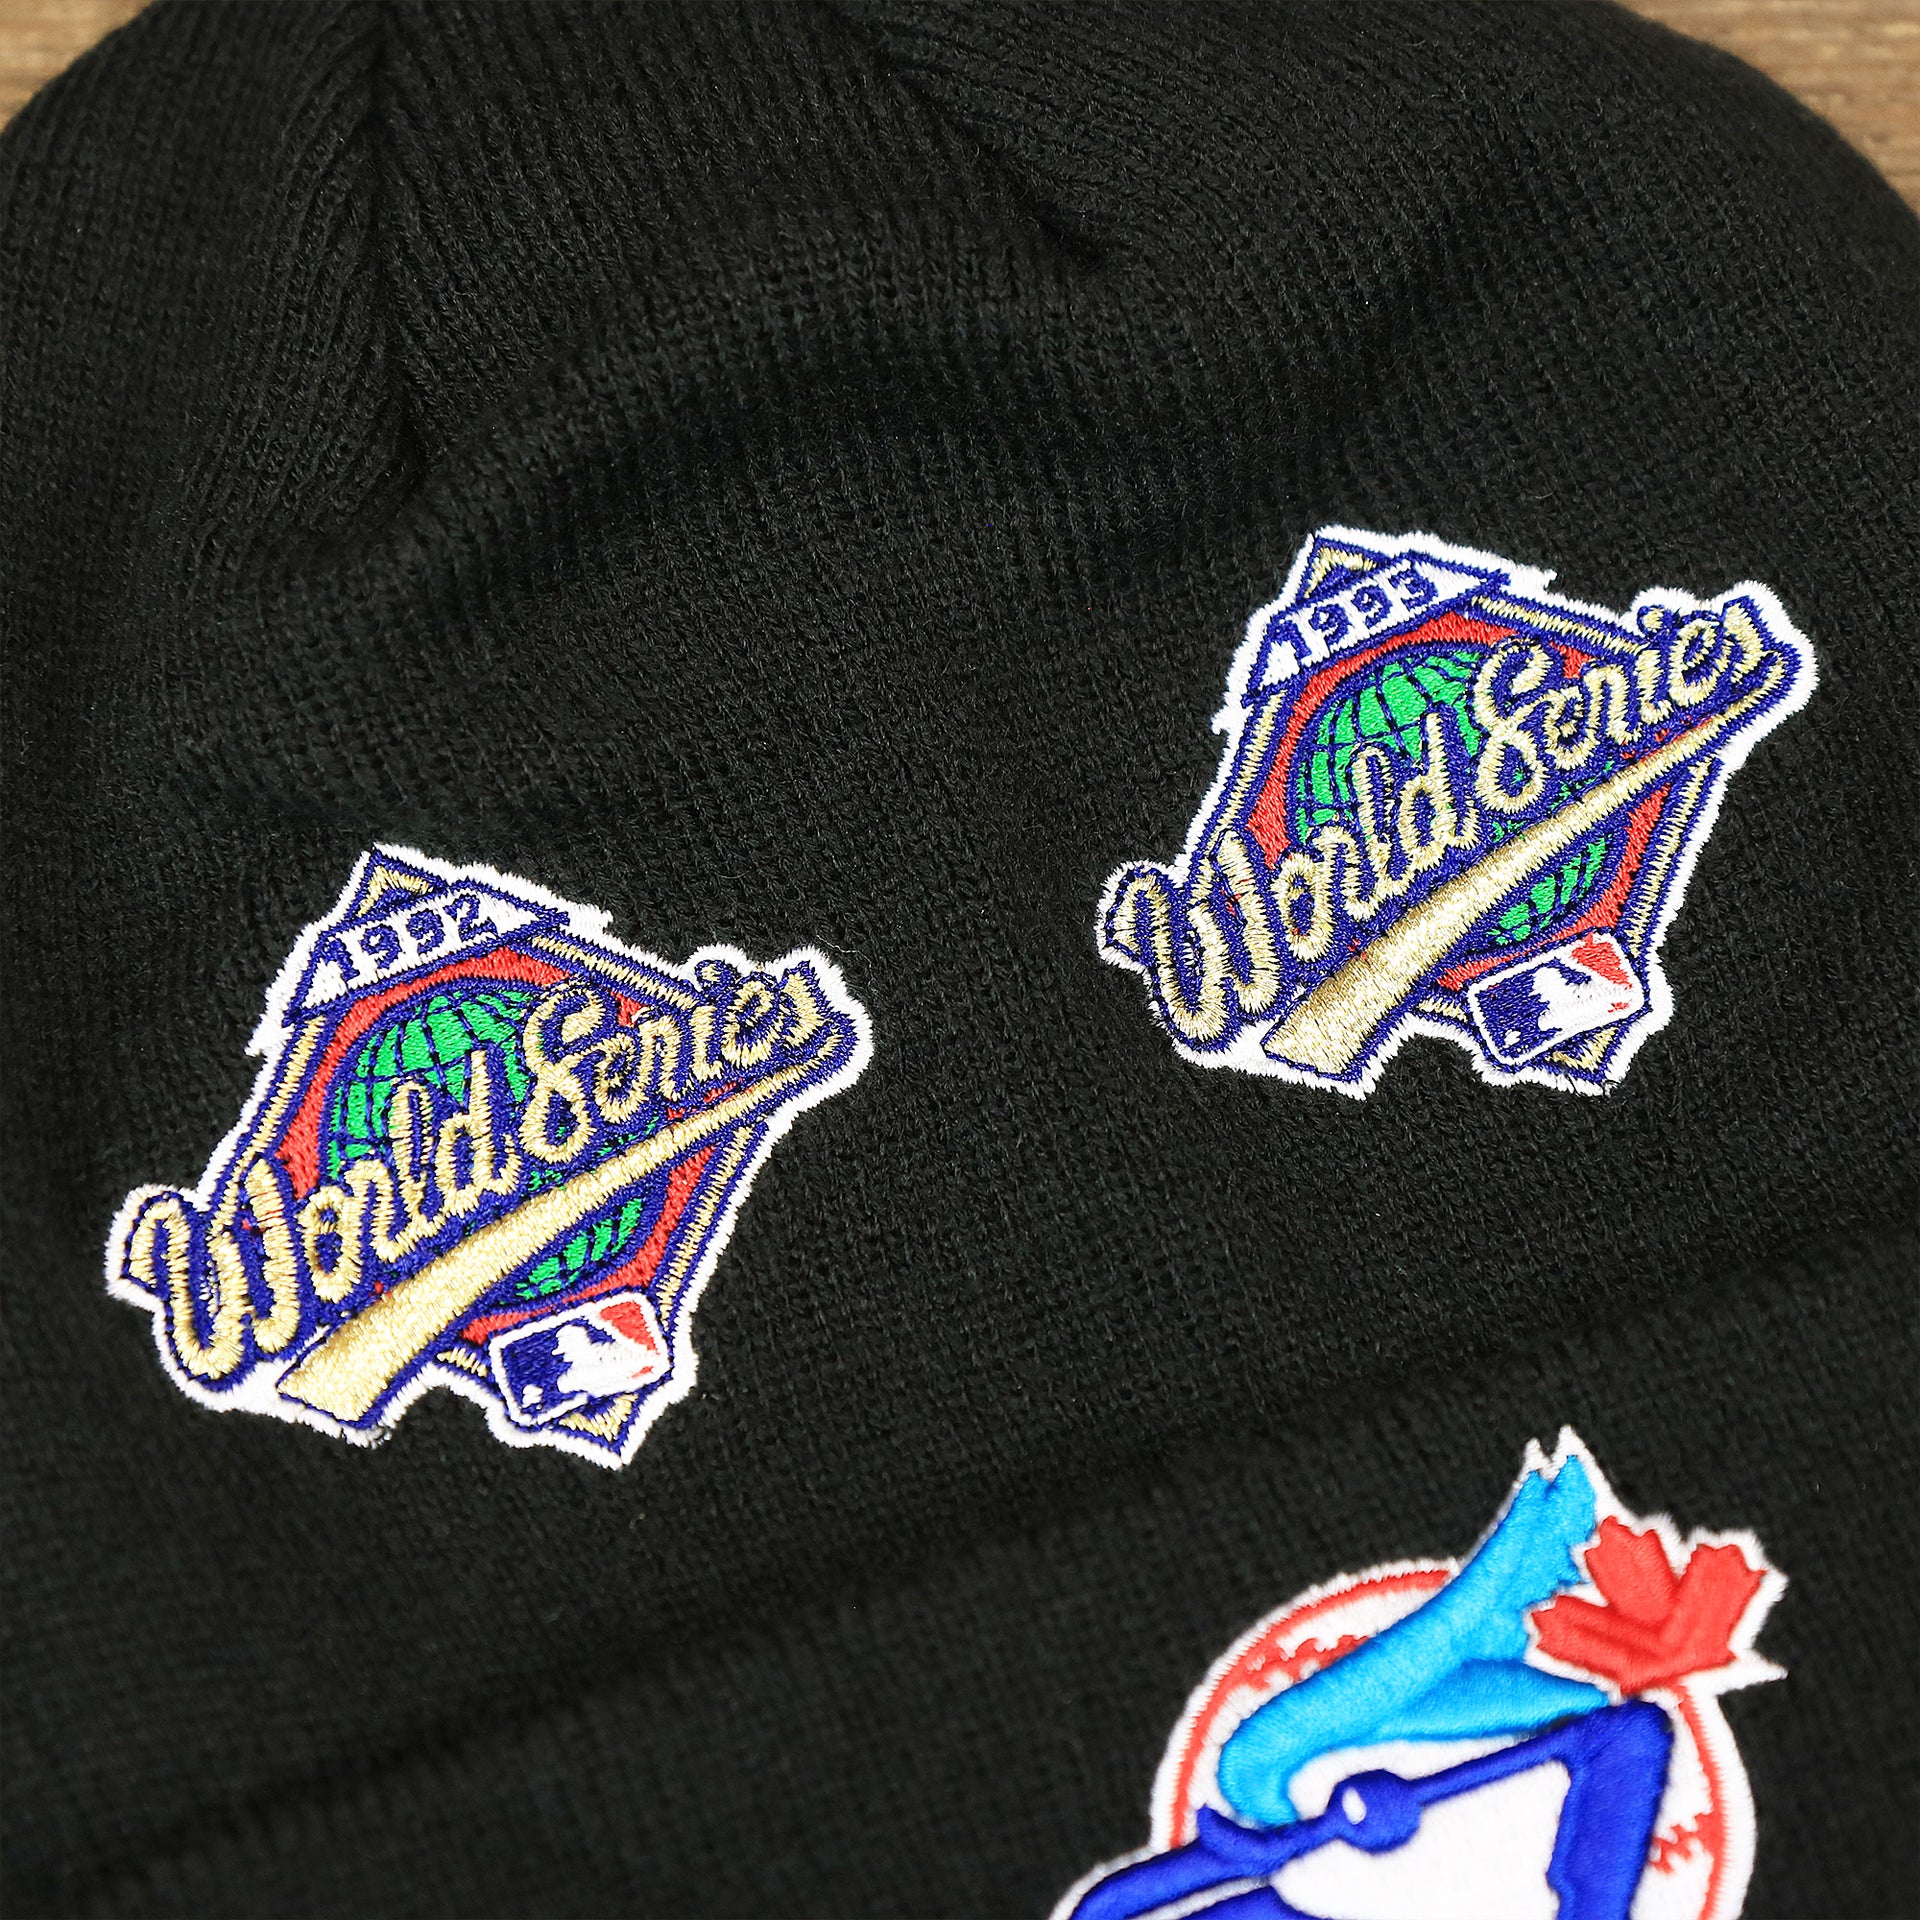 Th World Series Patches on the Toronto Blue Jays All Over World Series Side Patch 2x Champion Knit Cuff Beanie | New Era, Black